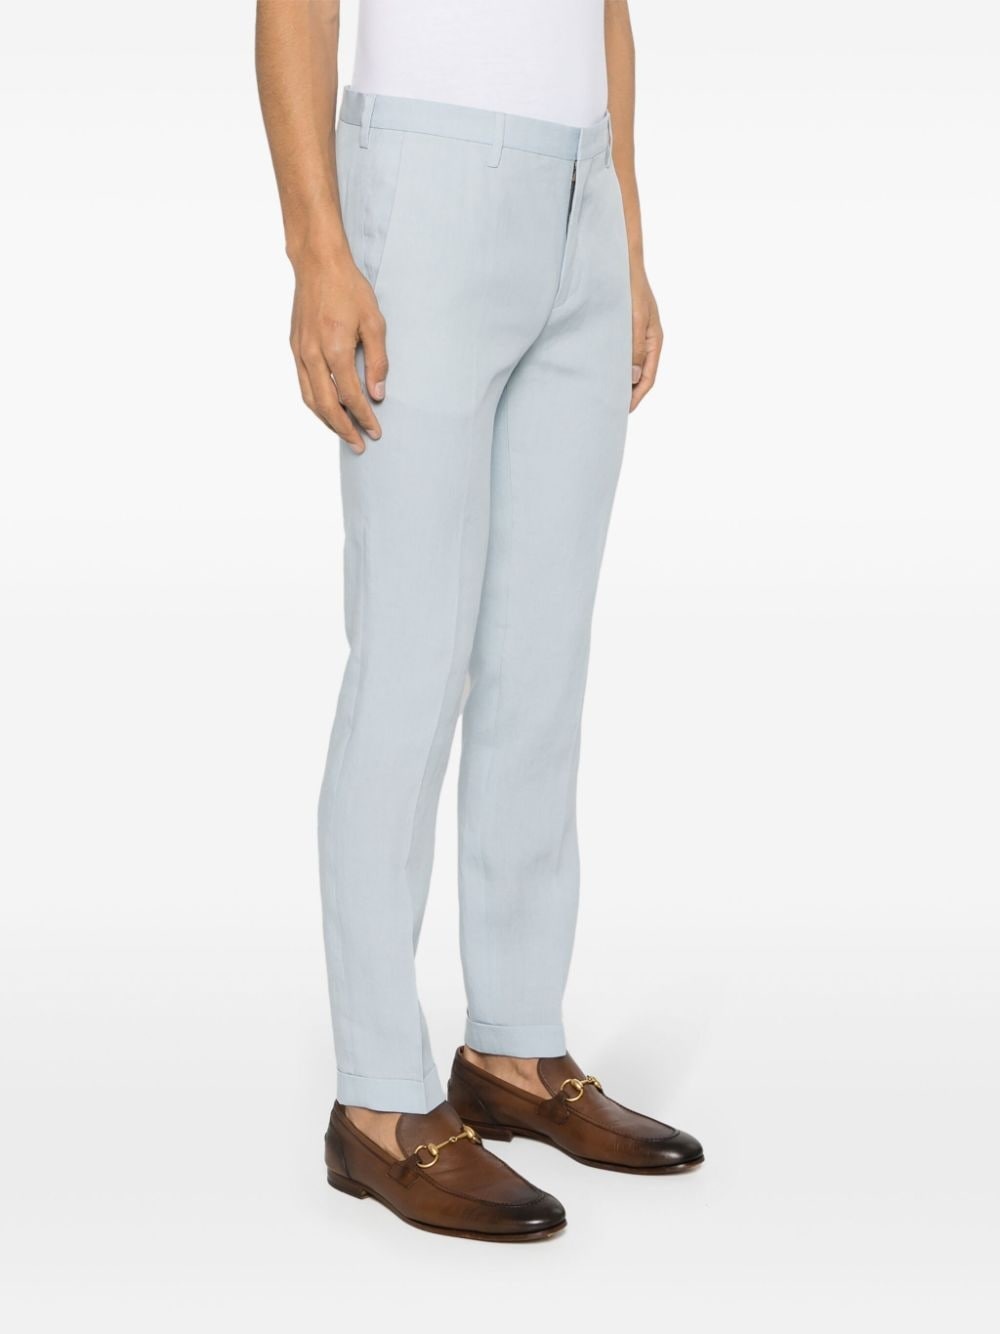 pressed-crease linen trousers - 3